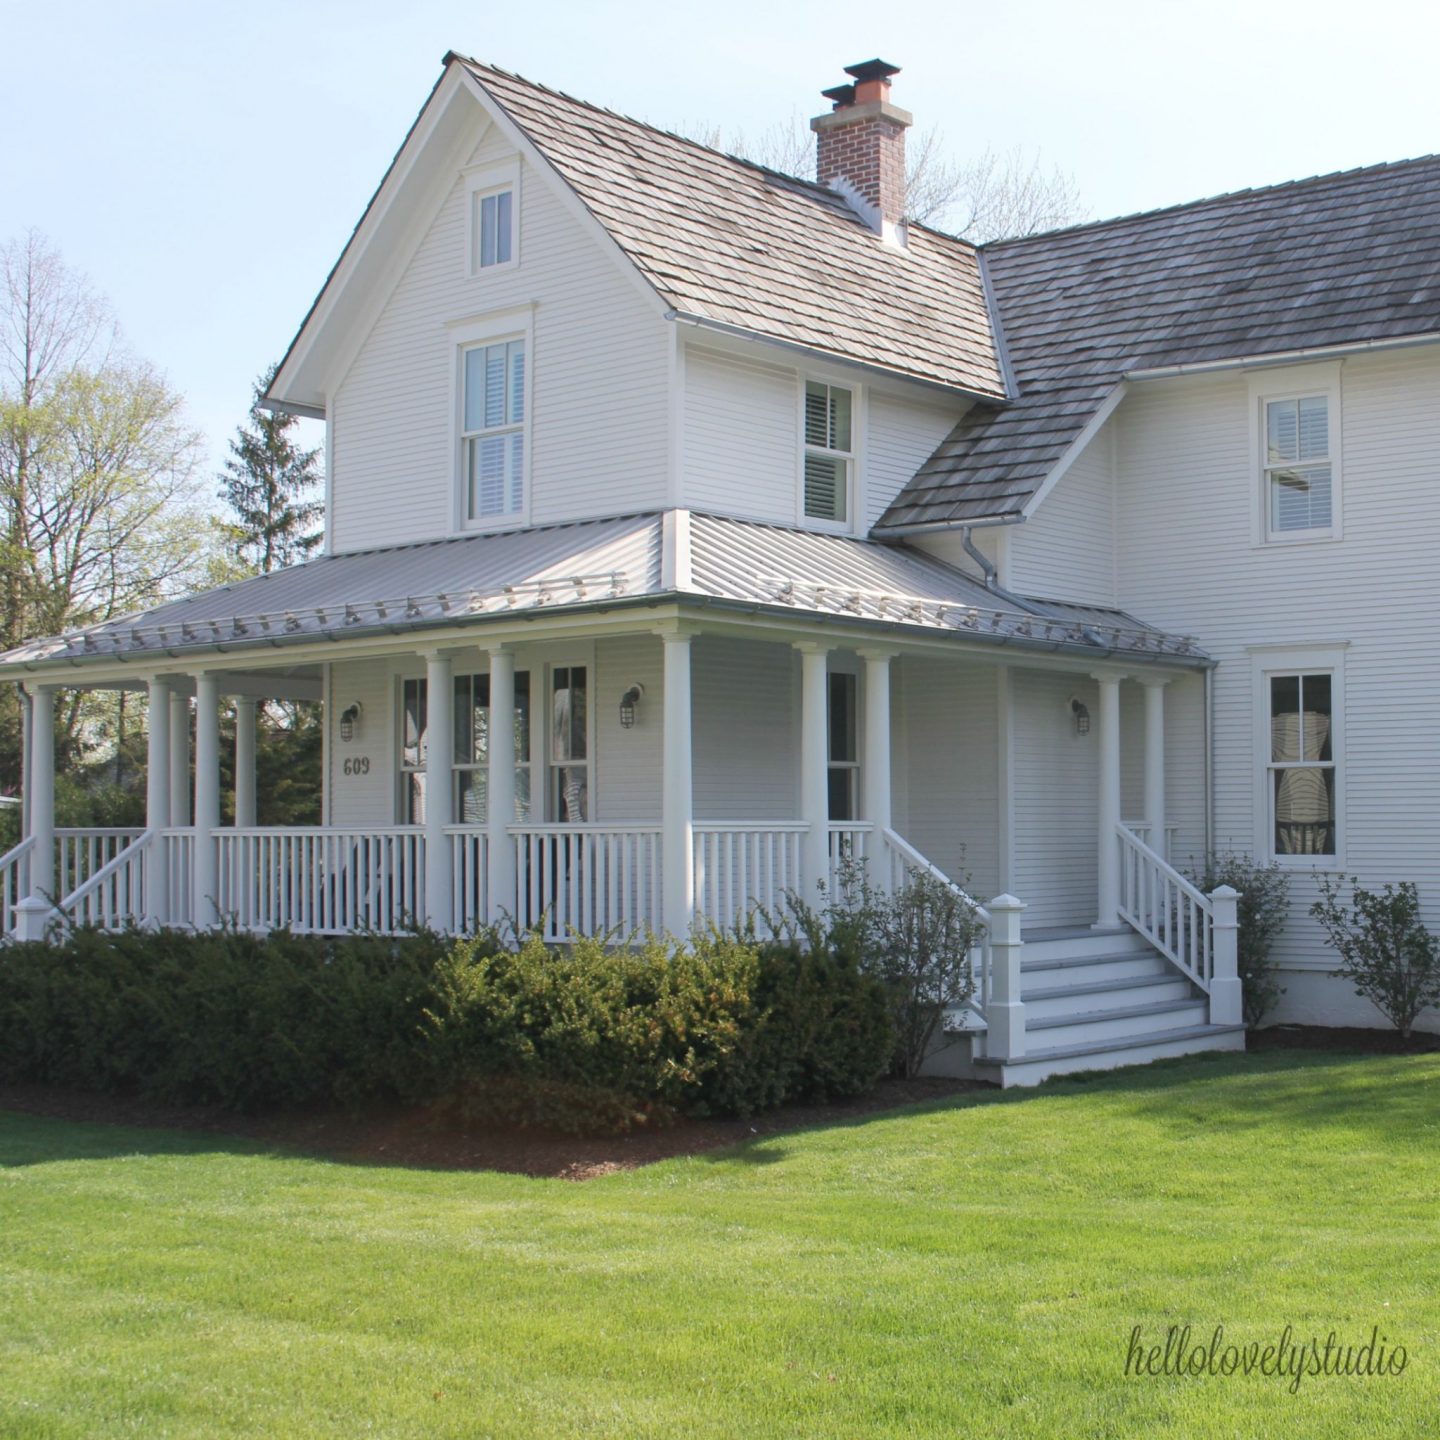 Try SW Extra White for this white exterior paint. Breathtaking historic white modern farmhouse in IL, has all the charm inside and out you might expect! Hello Lovely Studio. 